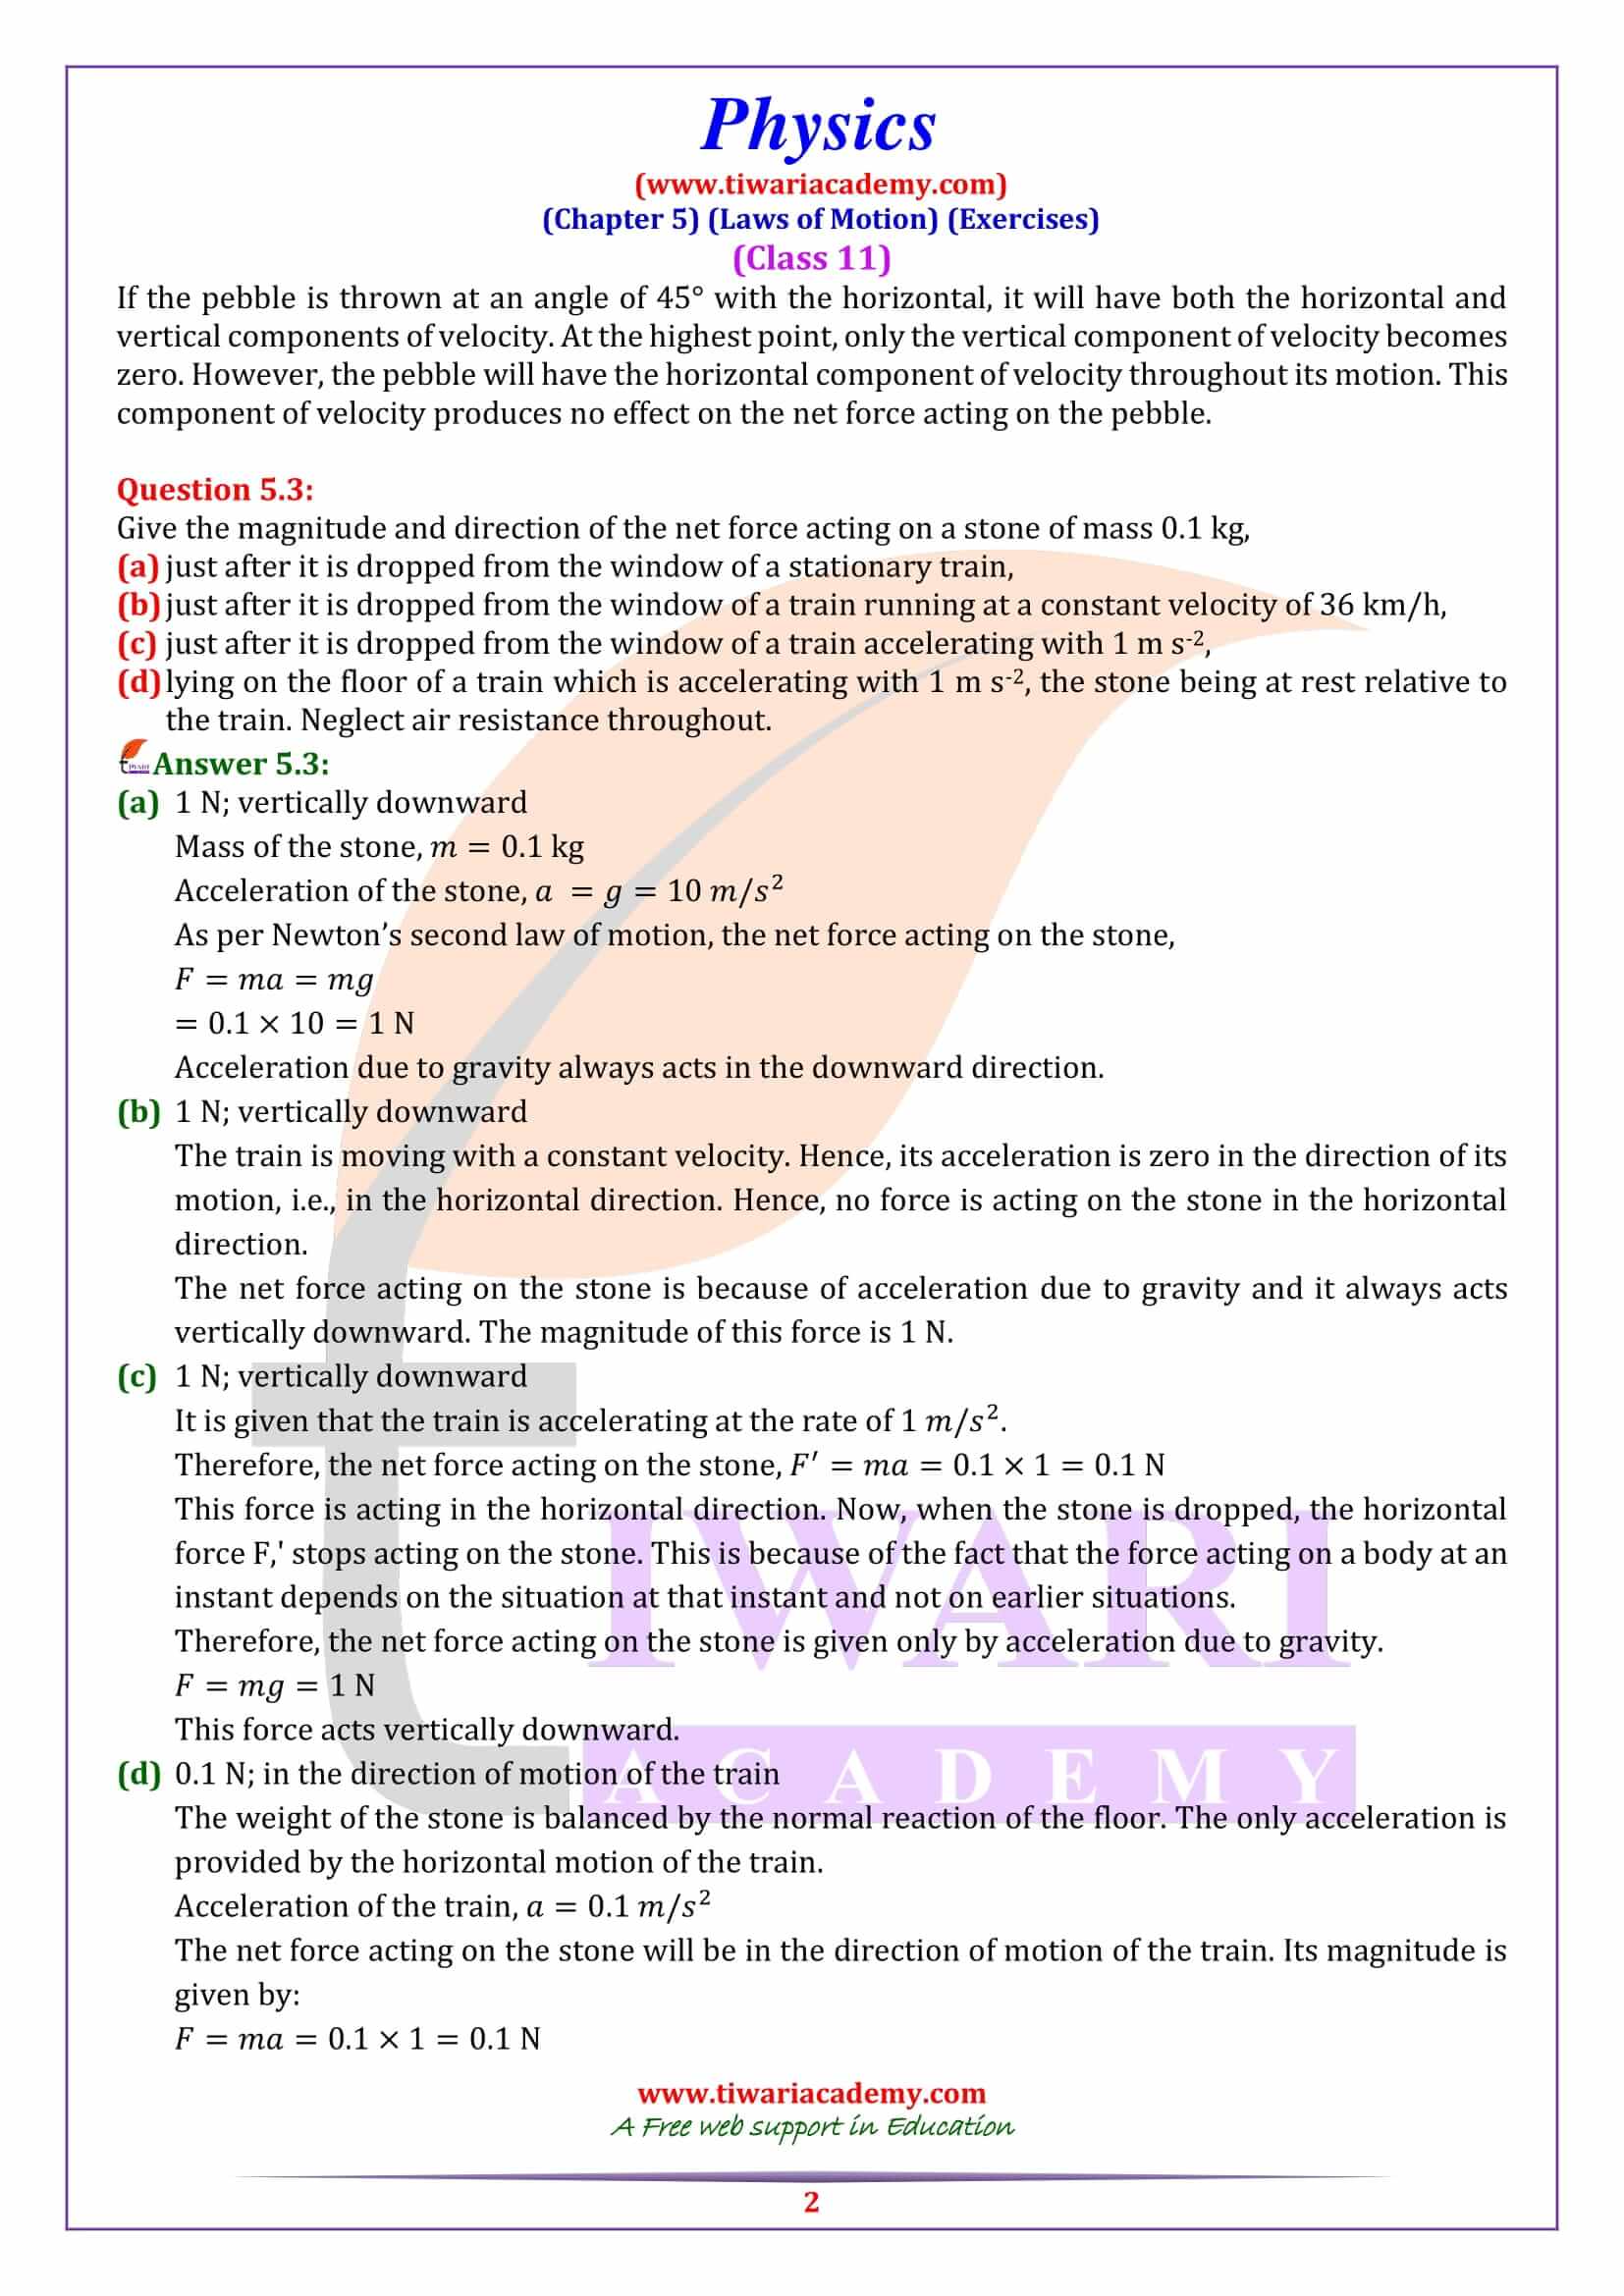 NCERT Solutions for Class 11 Physics Chapter 5 Exercises in PDF